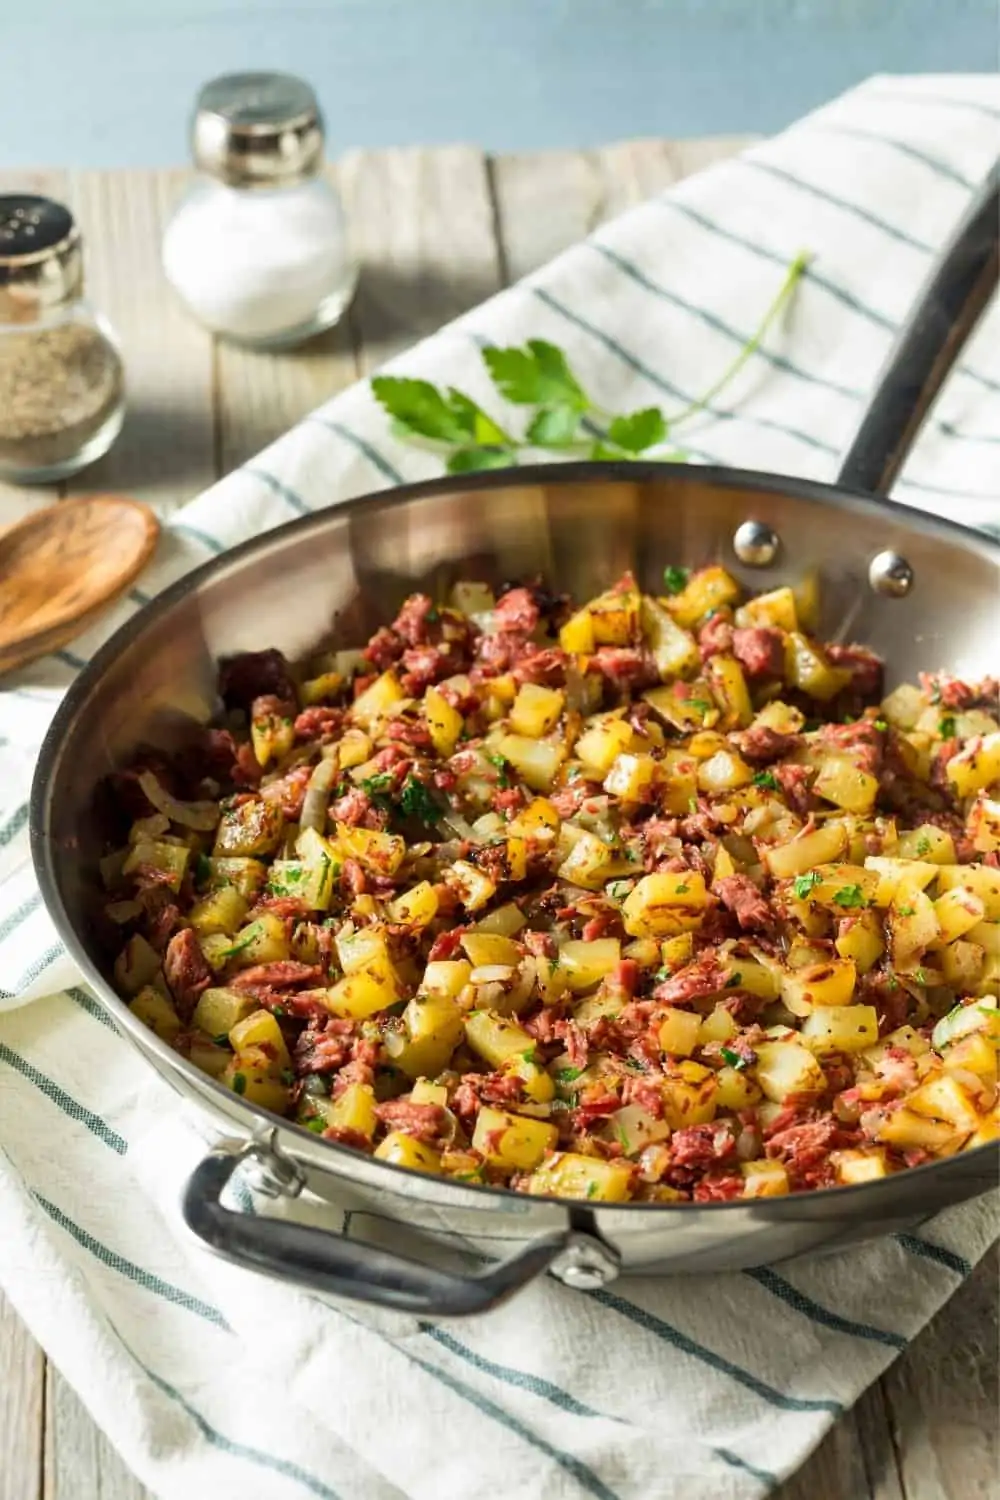 How to Cook Canned Corned Beef Hash